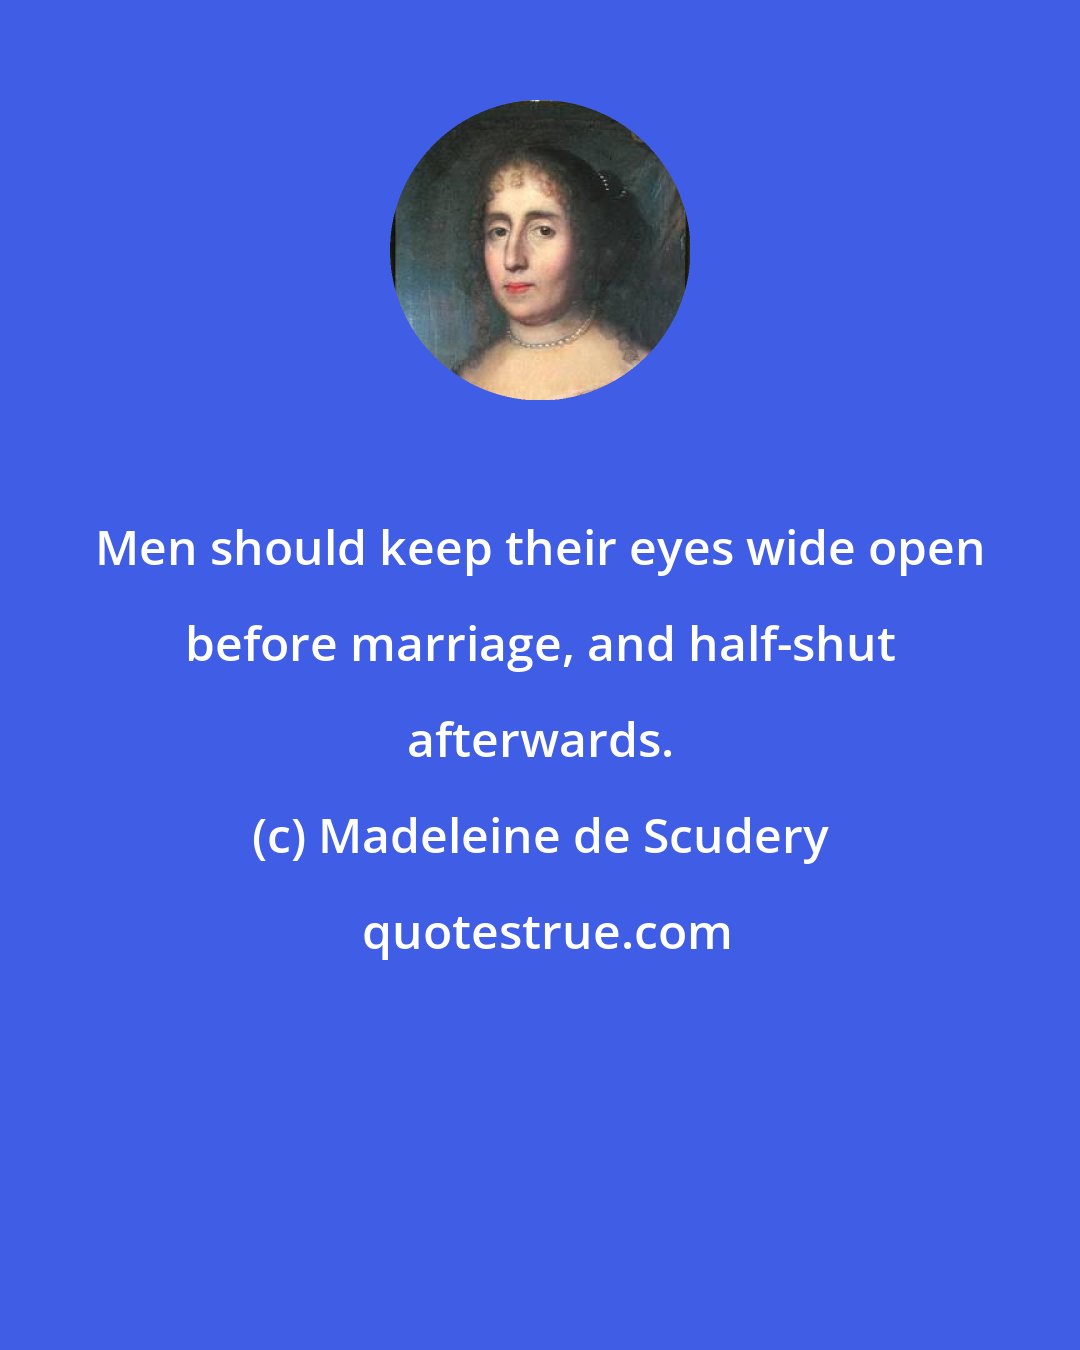 Madeleine de Scudery: Men should keep their eyes wide open before marriage, and half-shut afterwards.